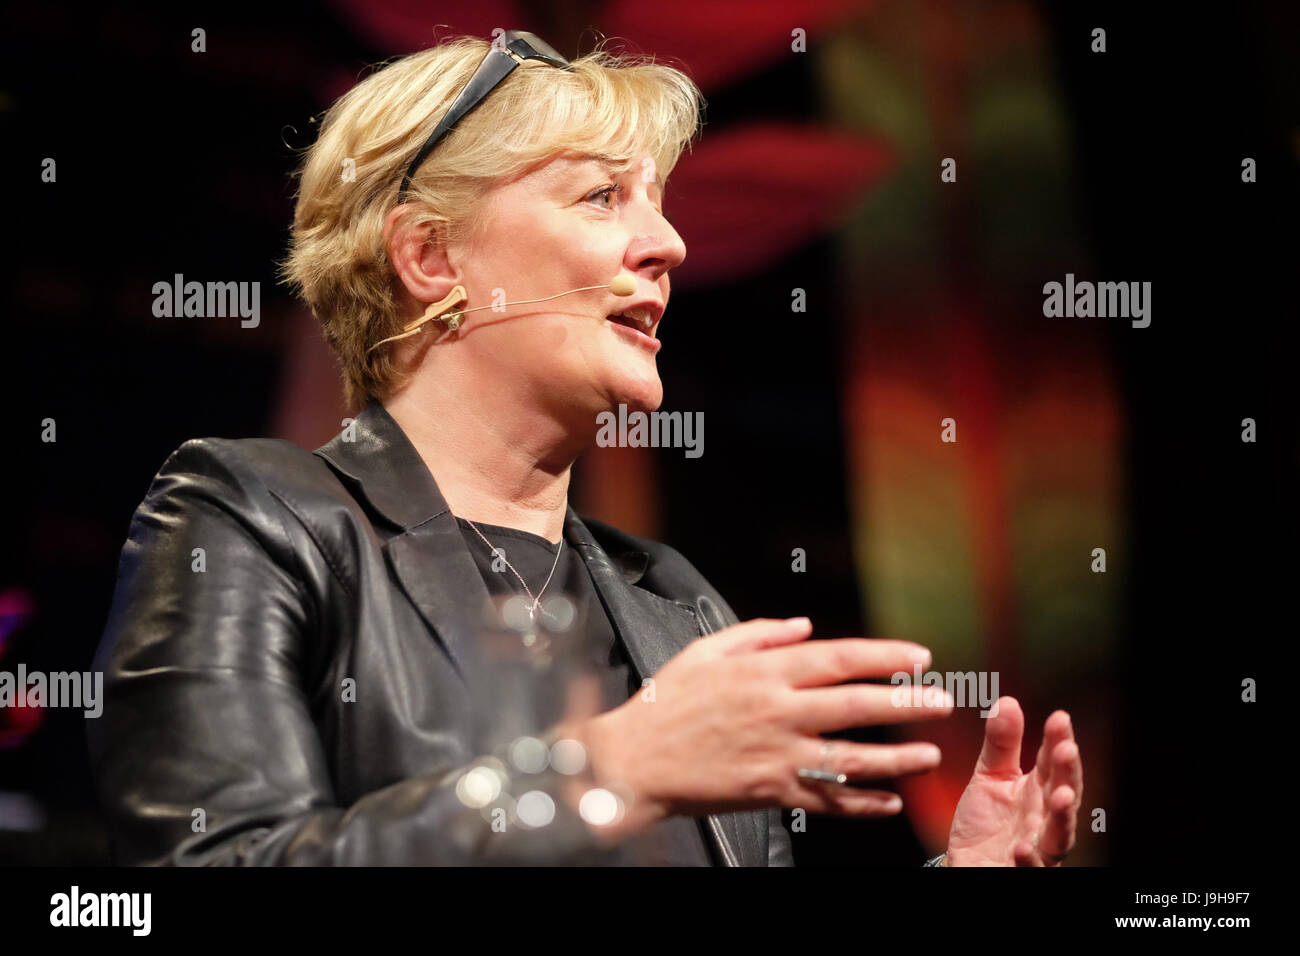 Hay Festival 2017 - Hay on Wye, Wales, UK - Friday 2nd June 2017 - Retail entrepreneur Jo Malone on stage at the Hay Festival talking about her career - the Hay Festival celebrates its 30th anniversary in 2017 - the literary festival runs until Sunday June 4th. Credit: Steven May/Alamy Live News Stock Photo